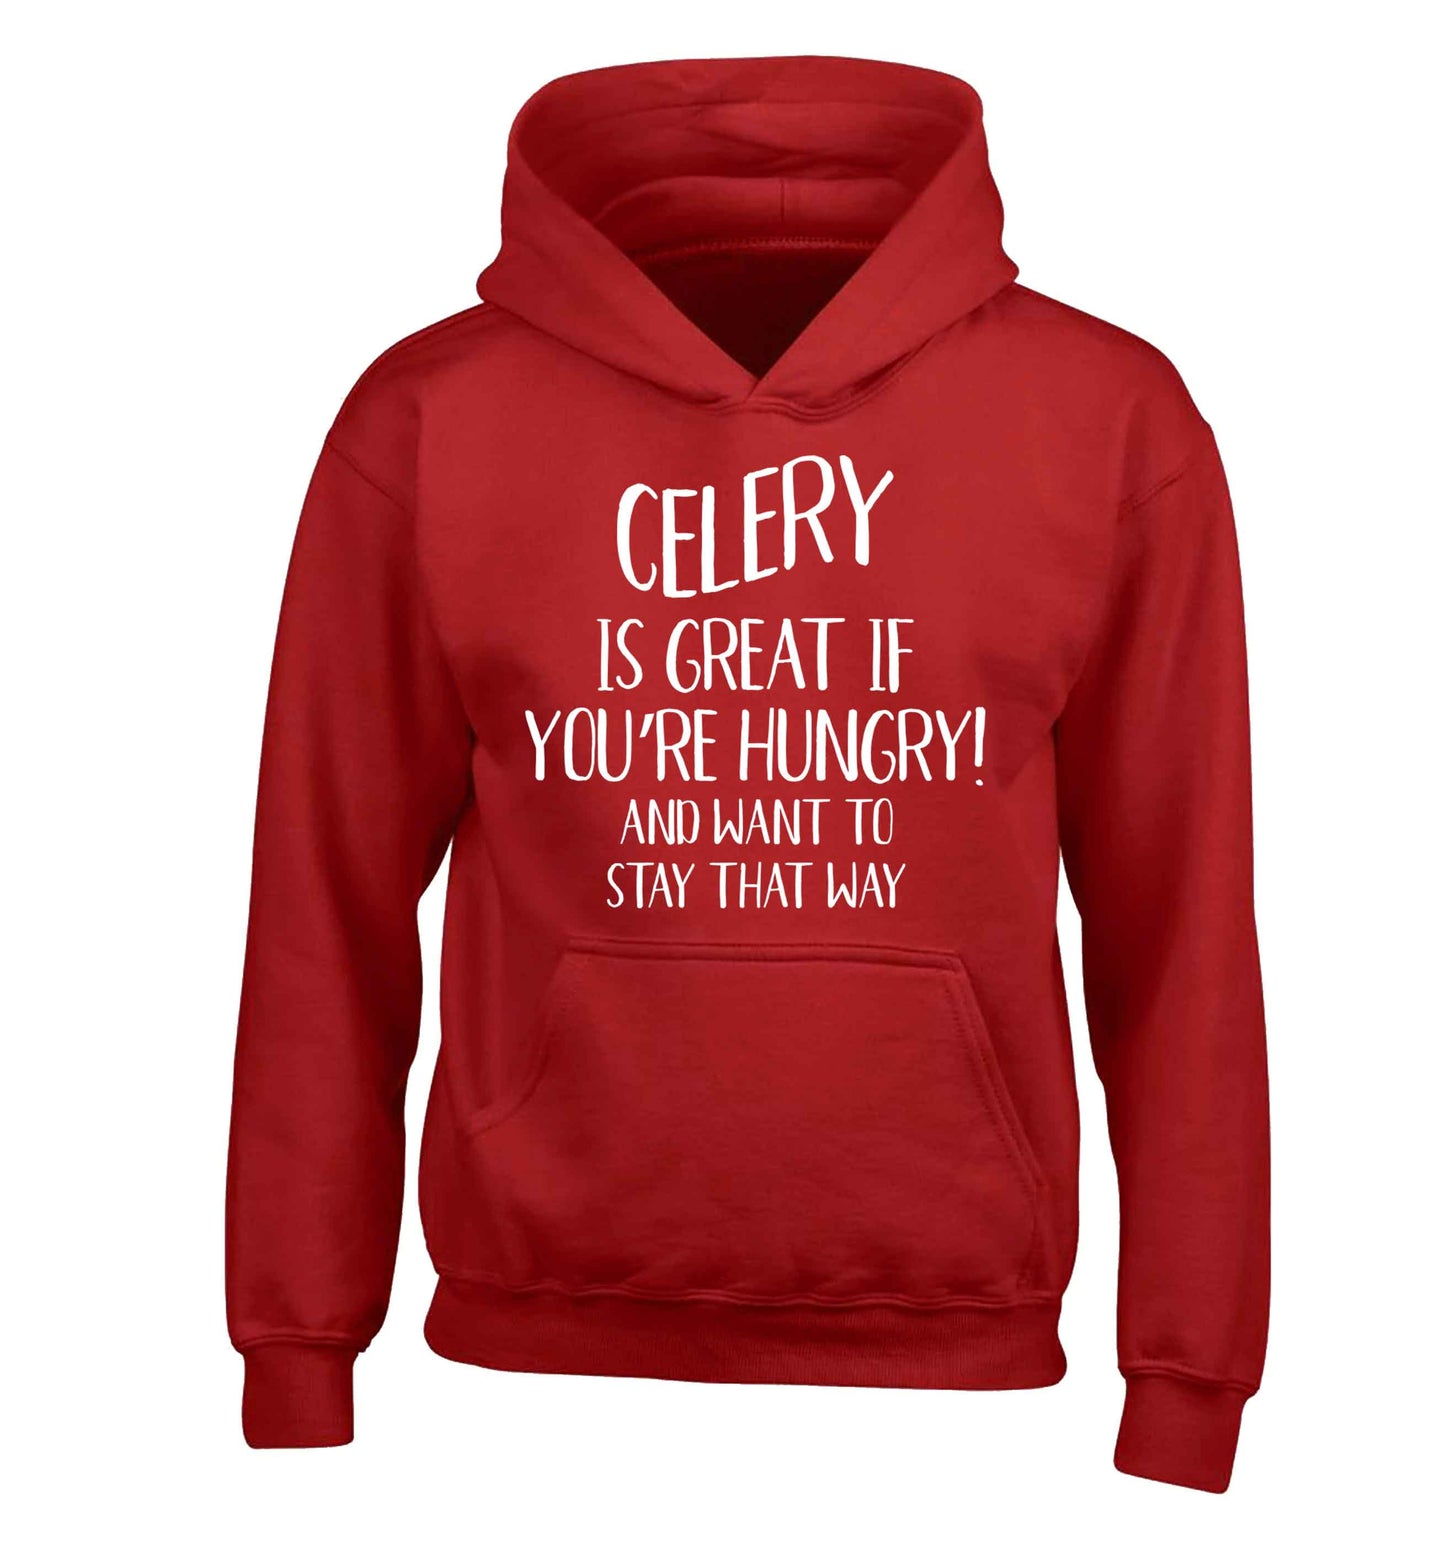 Cellery is great when you're hungry and want to stay that way children's red hoodie 12-13 Years